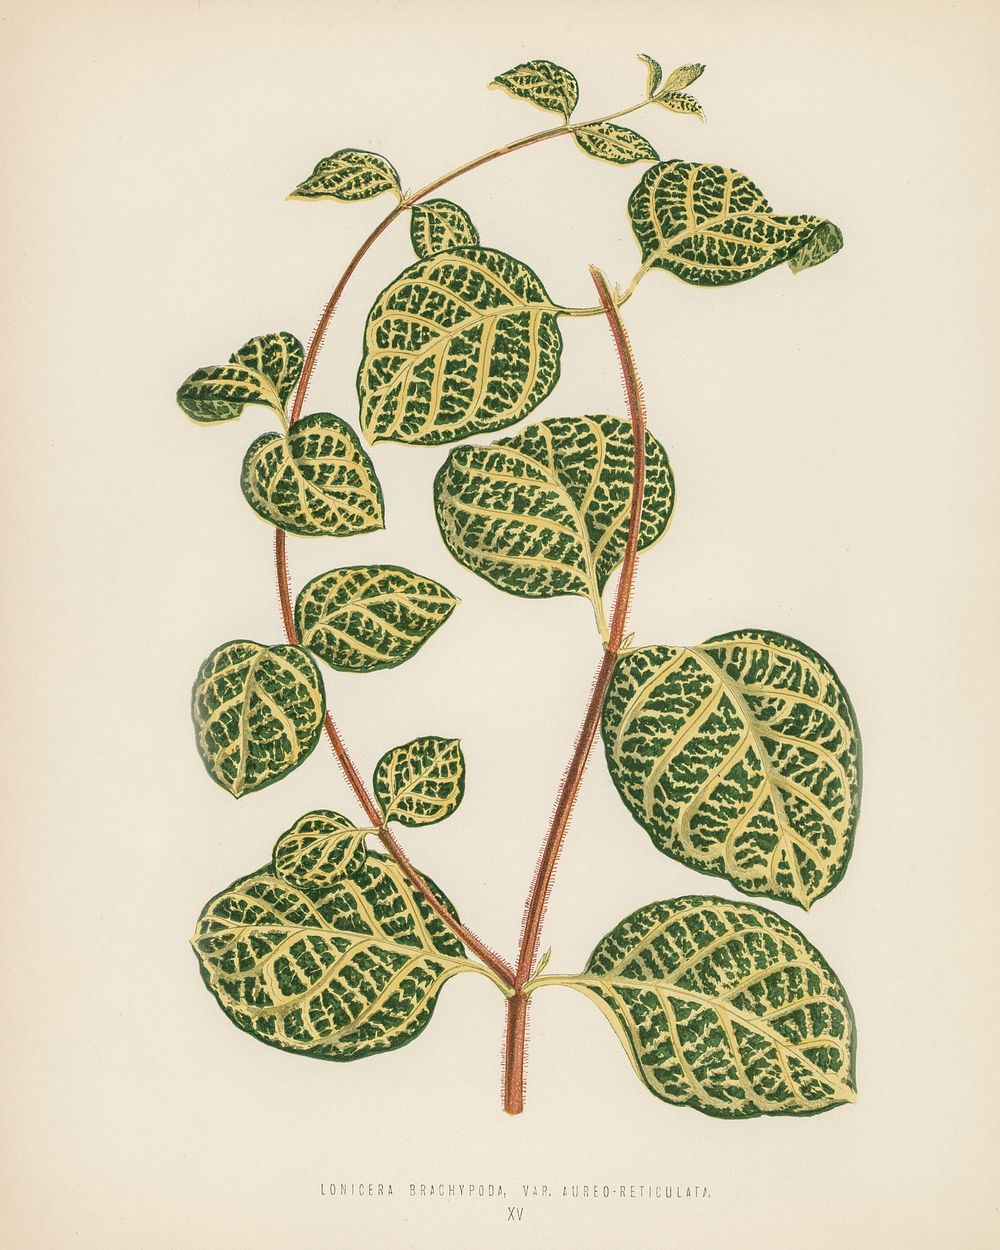 Lonicera Brachypoda. Digitally enhanced from our own 1929 edition of New and Rare Beautiful-Leaved Plants by Benjamin…